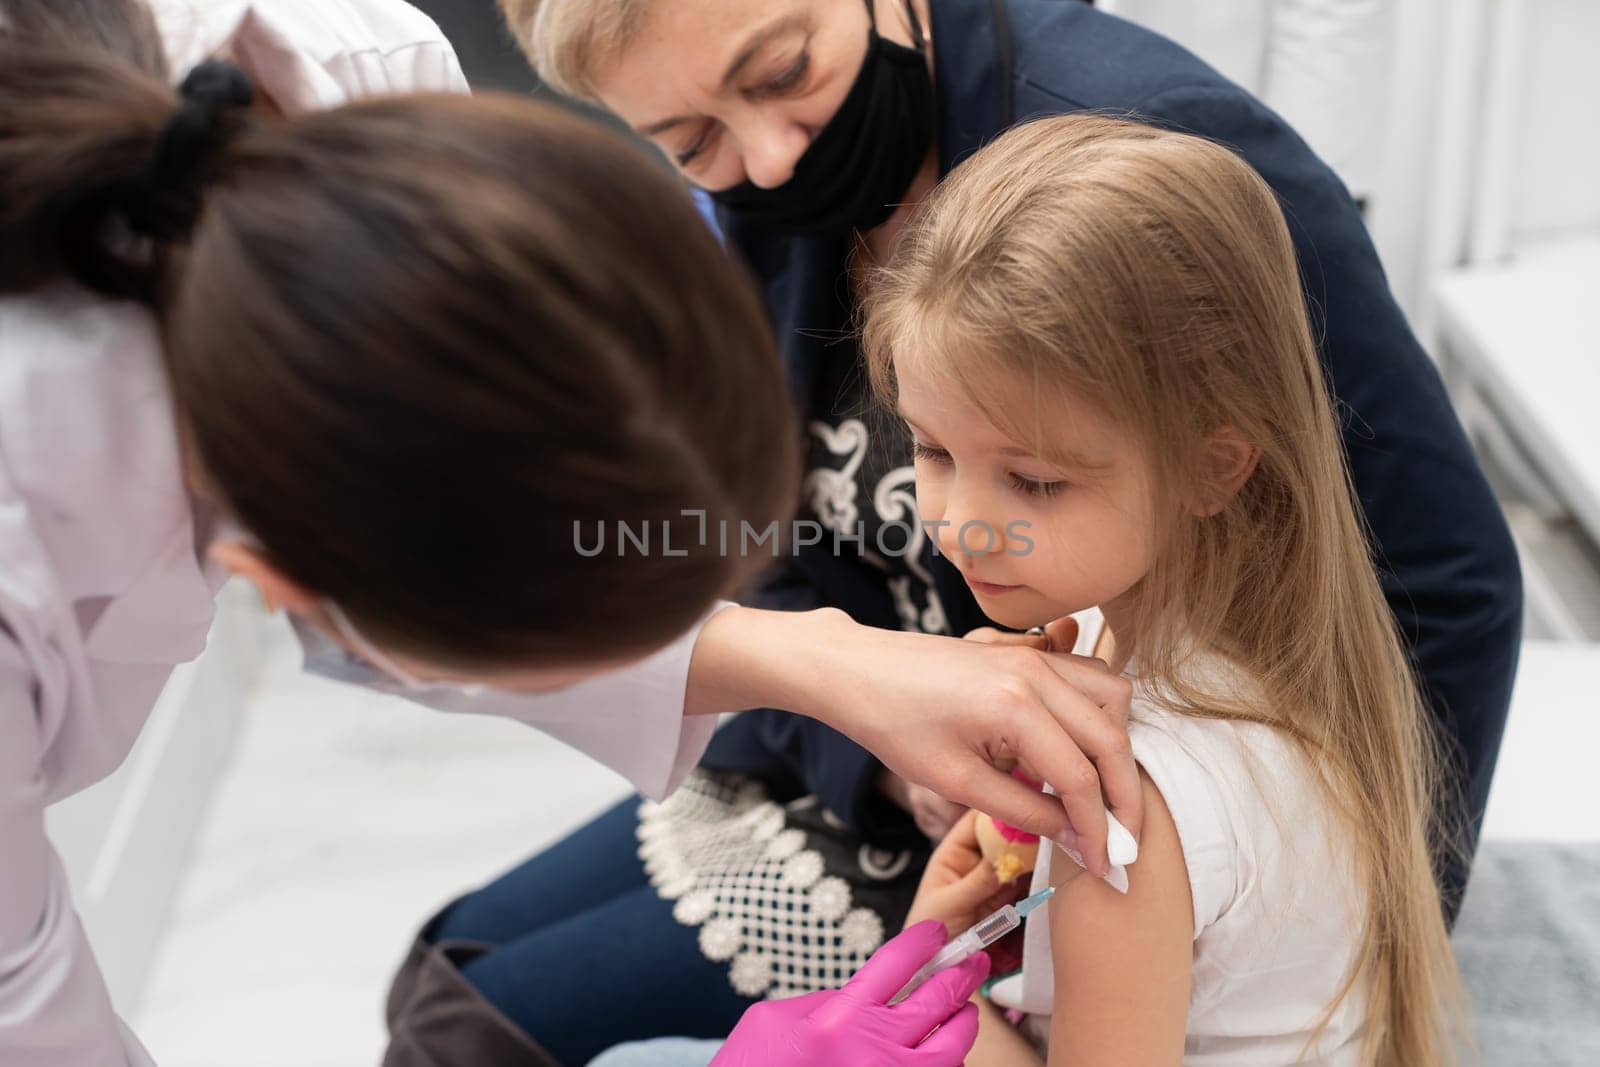 A grandmother with a good approach to young children encourages her granddaughter, who came to a doctor's office in a large hospital for the first time in her life. Safe vaccination of children.